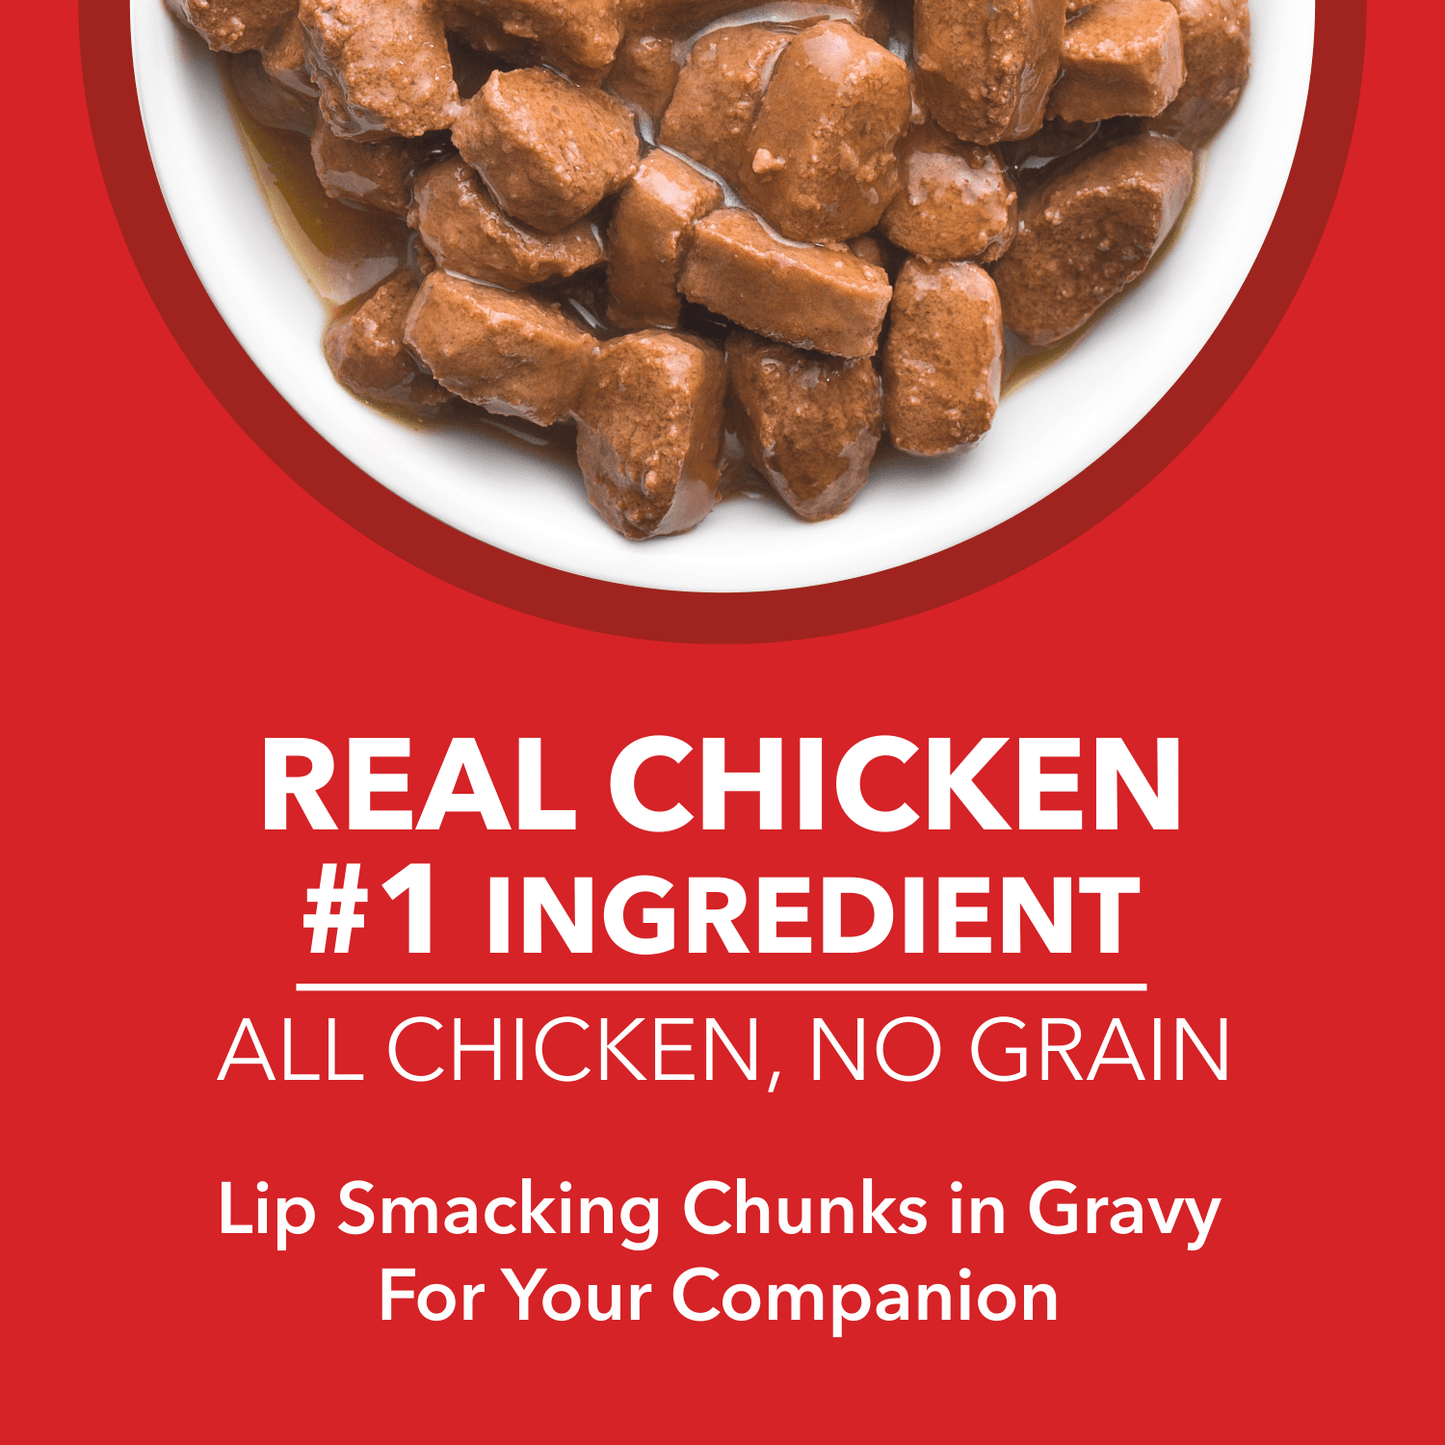 Drools Real Chicken  Chicken Liver Chunks in Gravy Puppy Wet Food